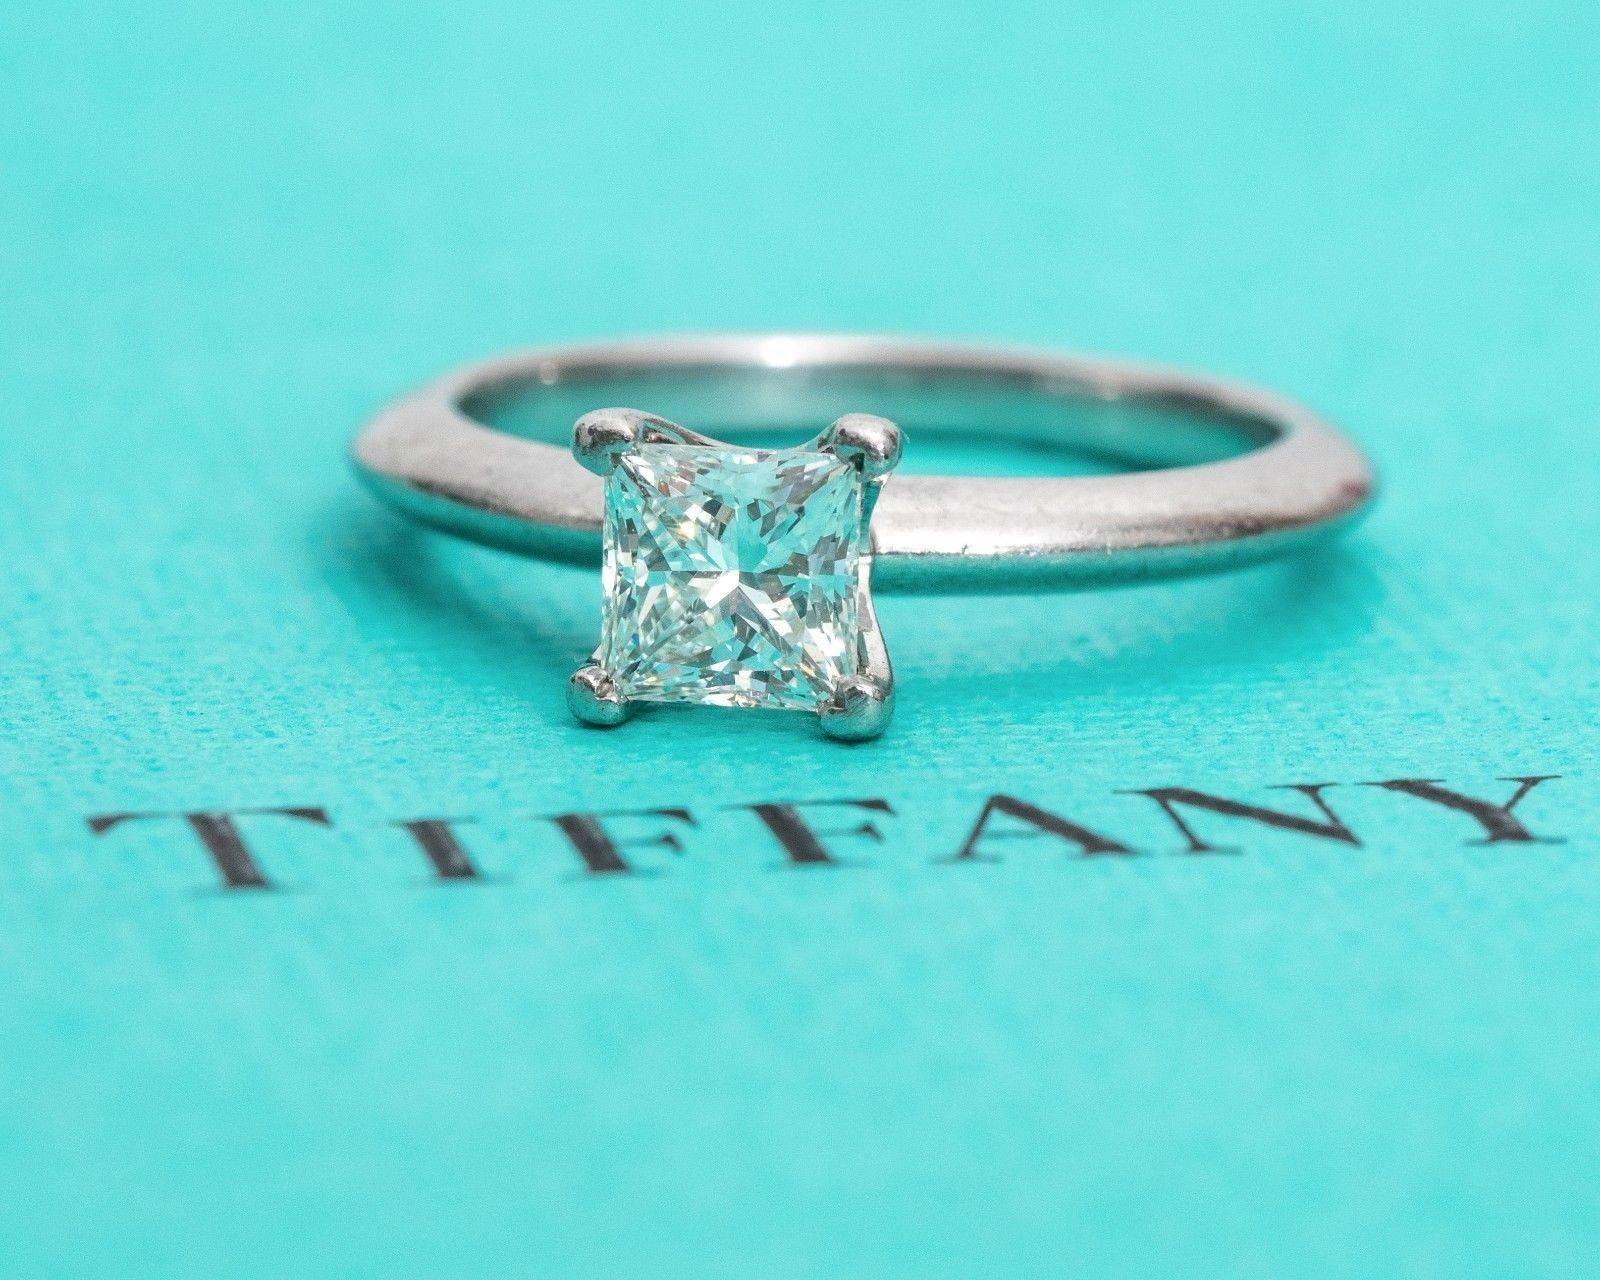 Tiffany & Co. Classic Diamond Platinum Solitaire Engagement Ring In Good Condition For Sale In Atlanta, GA